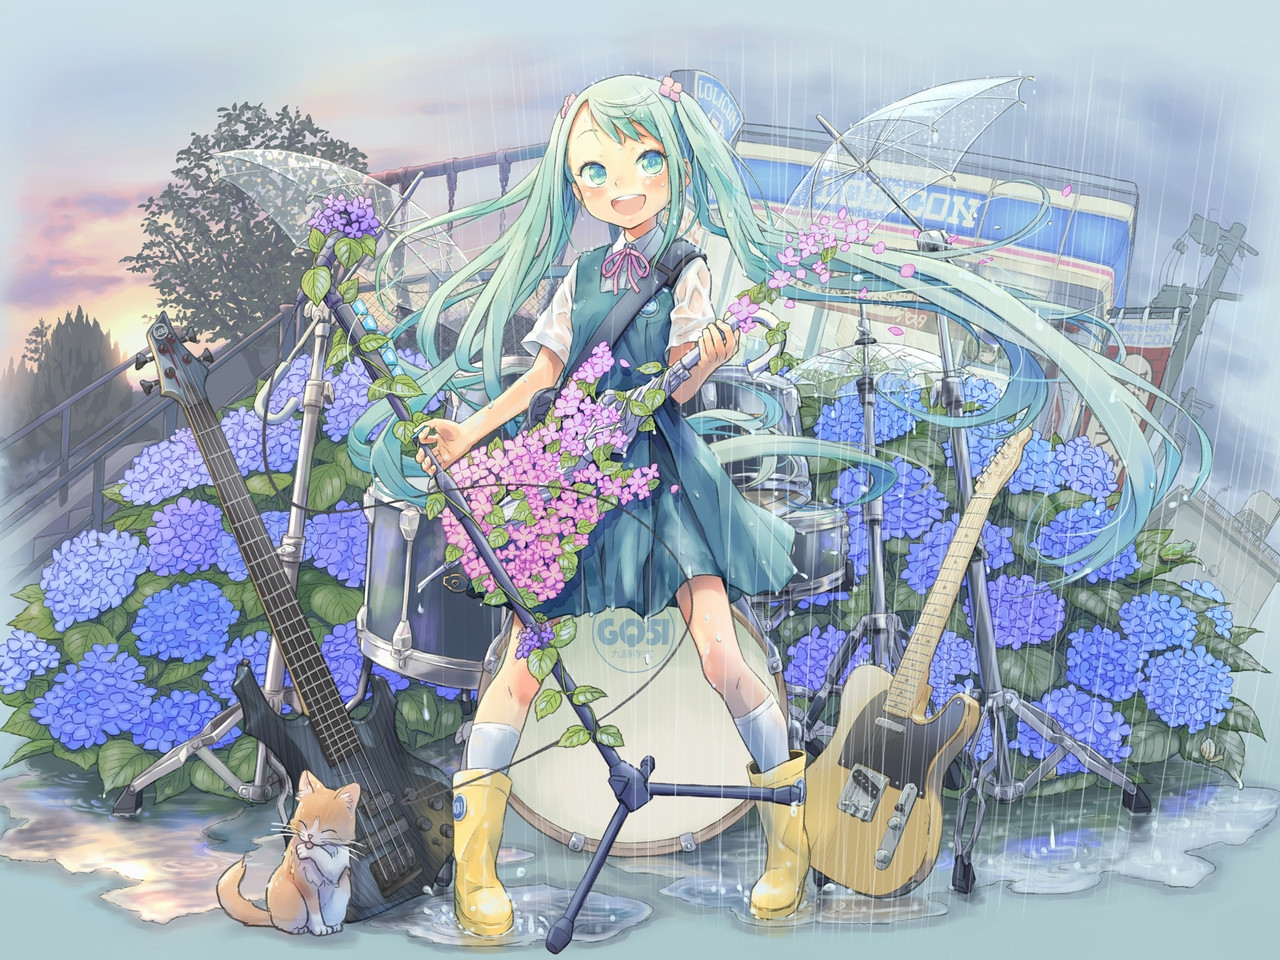 zh-apic-in 初音未来 (19)